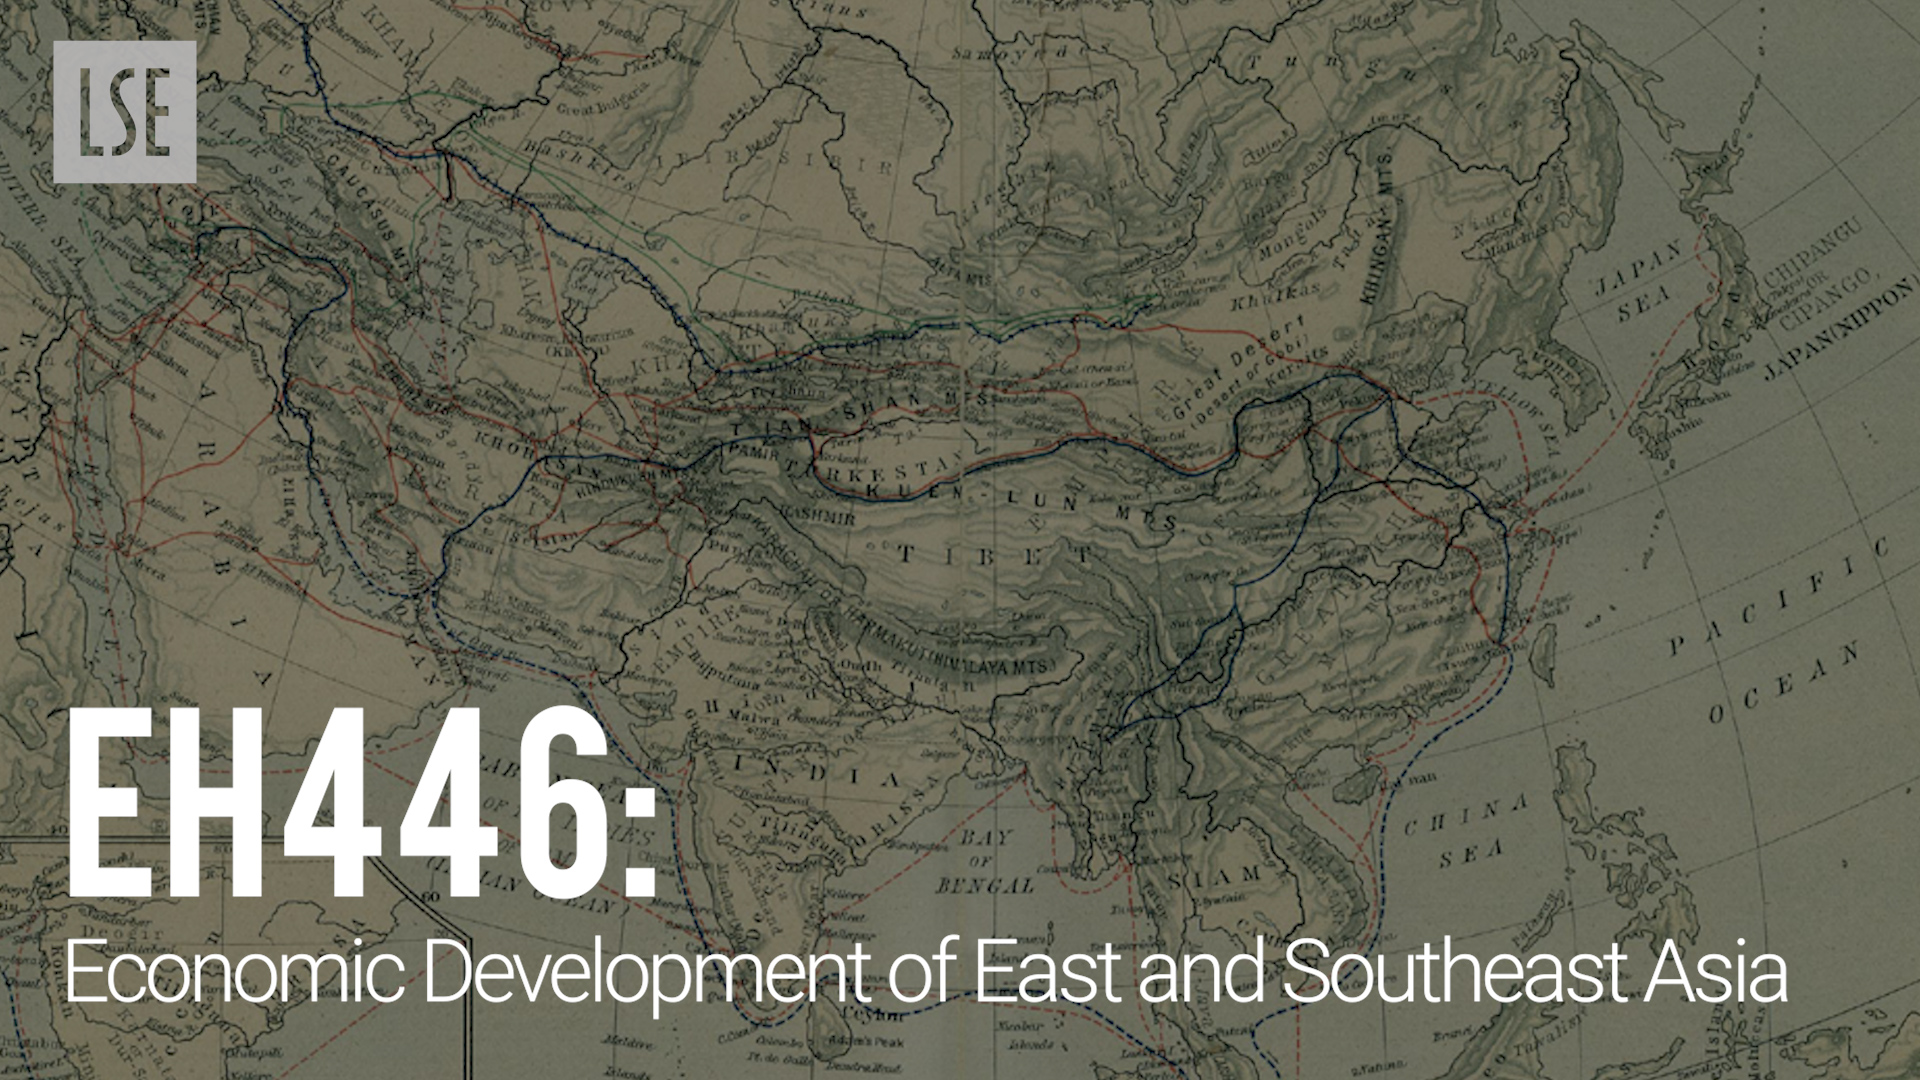 EH446 Economic Development of East and Southeast Asia